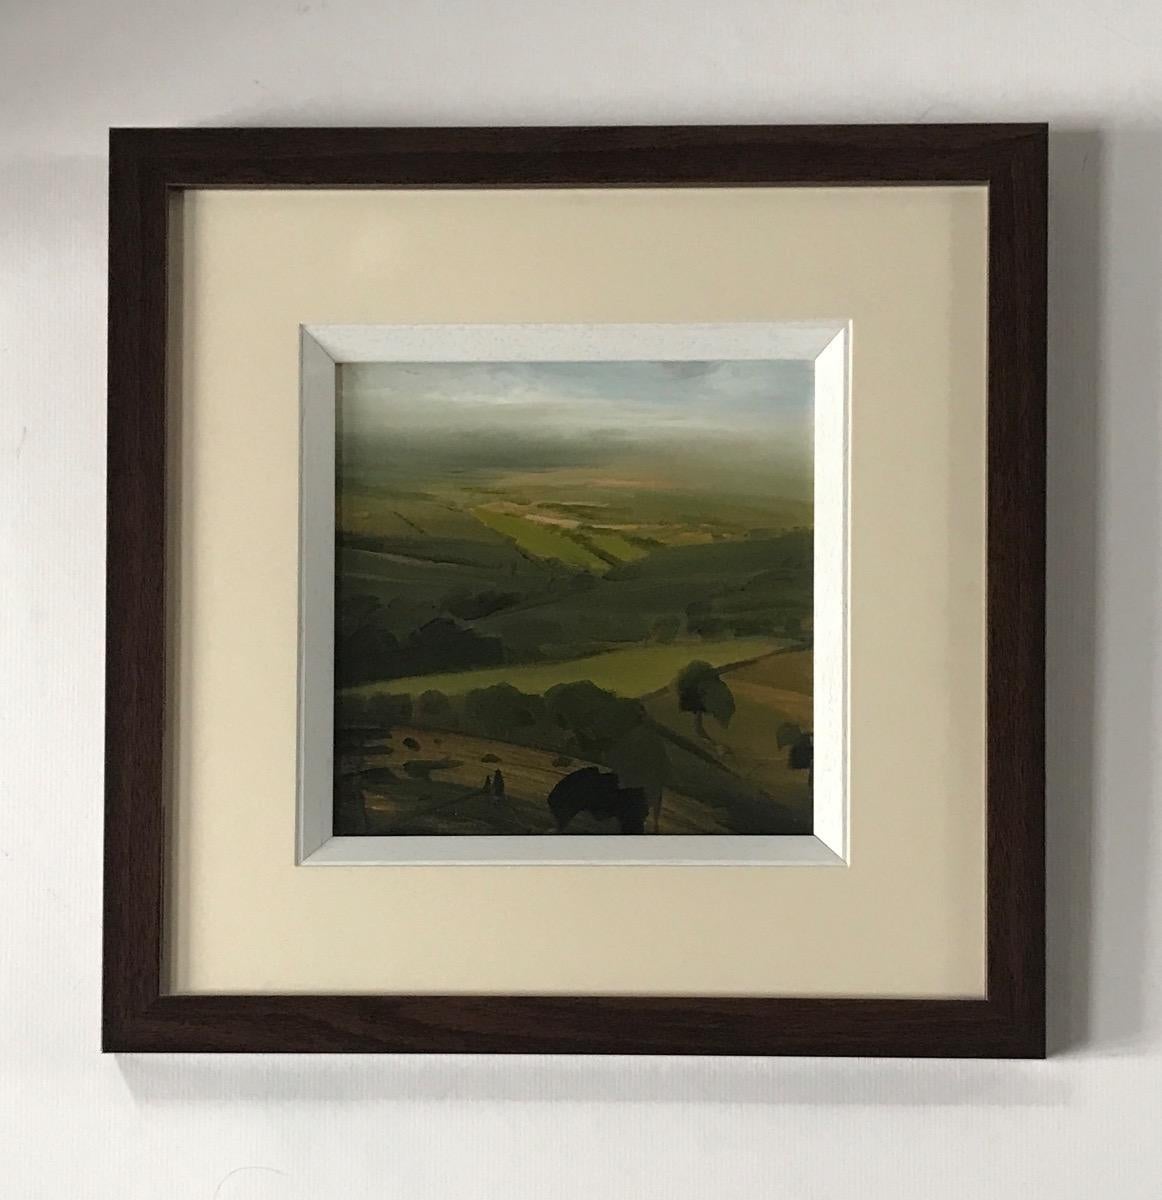 Hills In Mist, Original painting, Landscape, Nature, Birds view, Lake, Hills  - Contemporary Painting by James Naughton